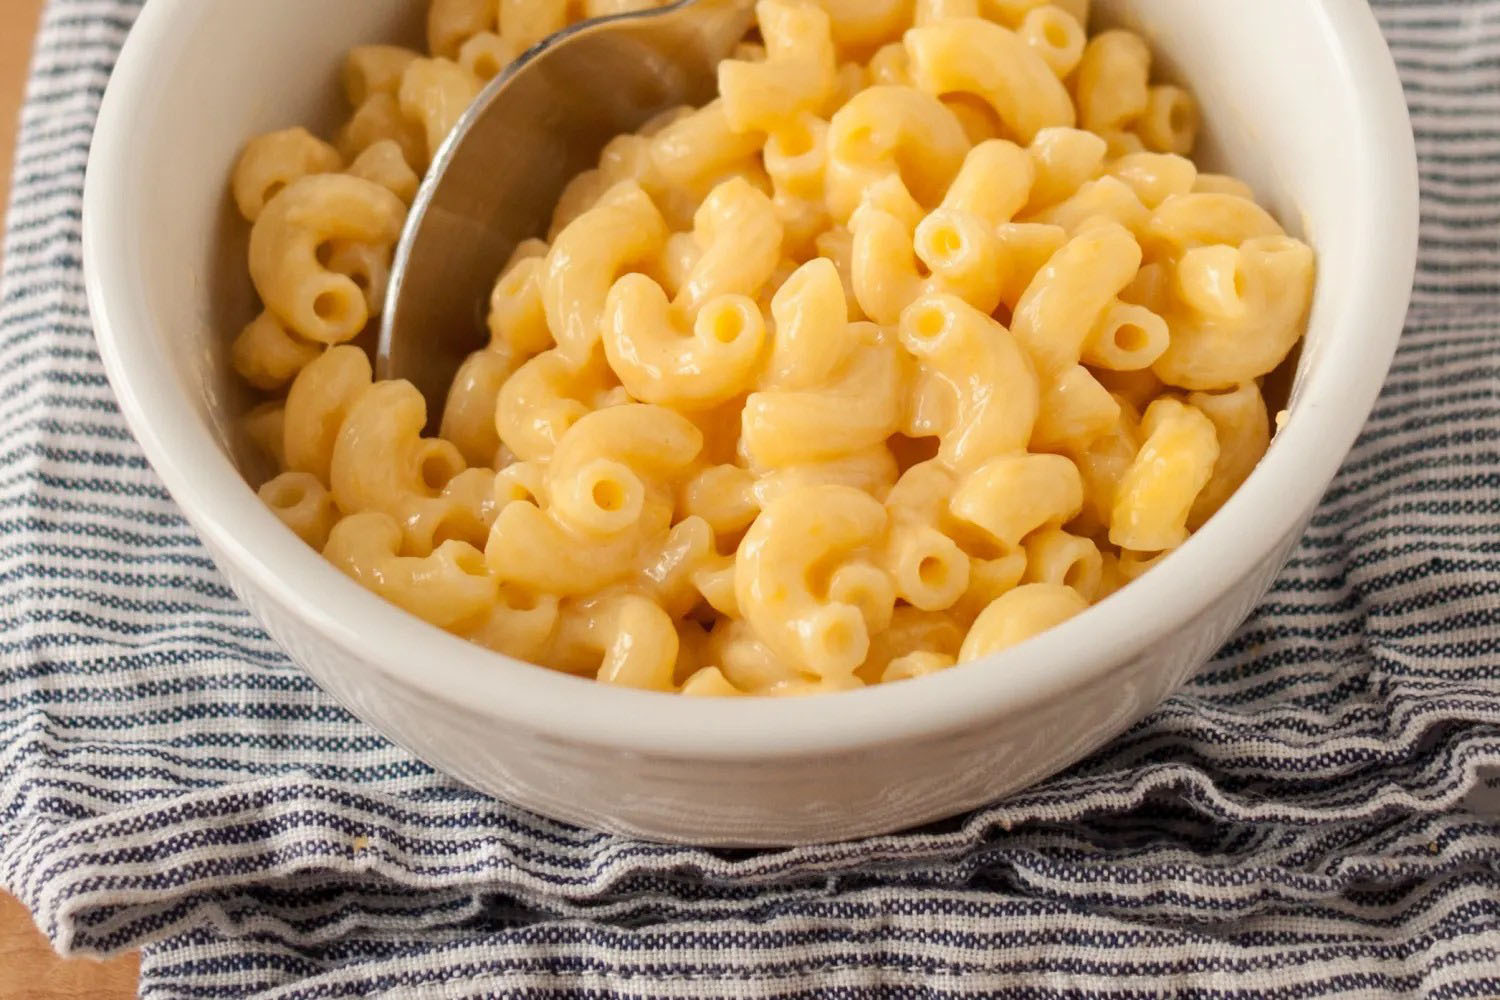 what-is-macaroni-made-of